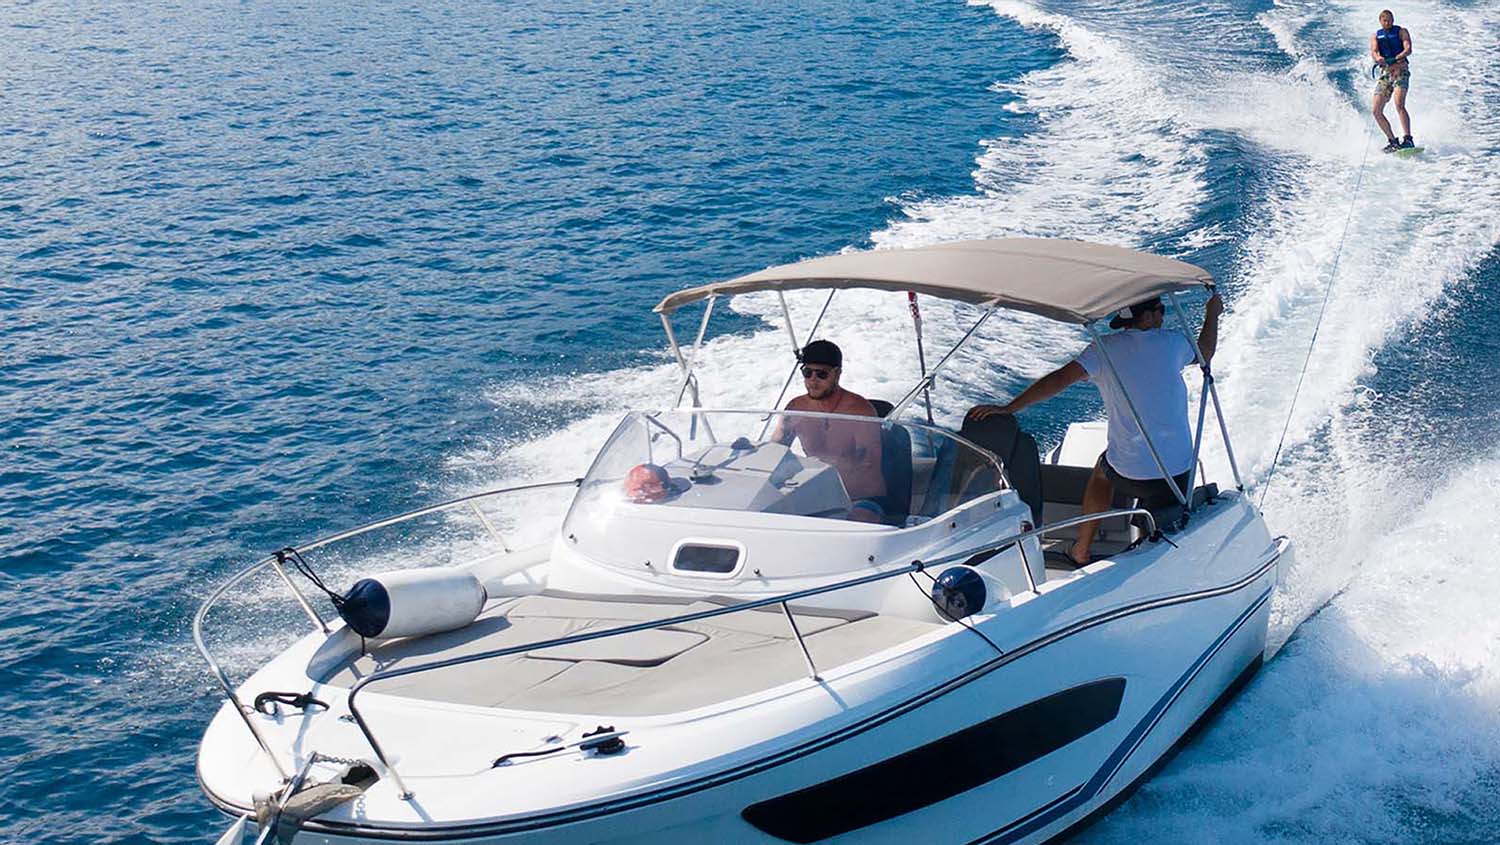 The Benefits of Buying a New Boat vs a Used Boat